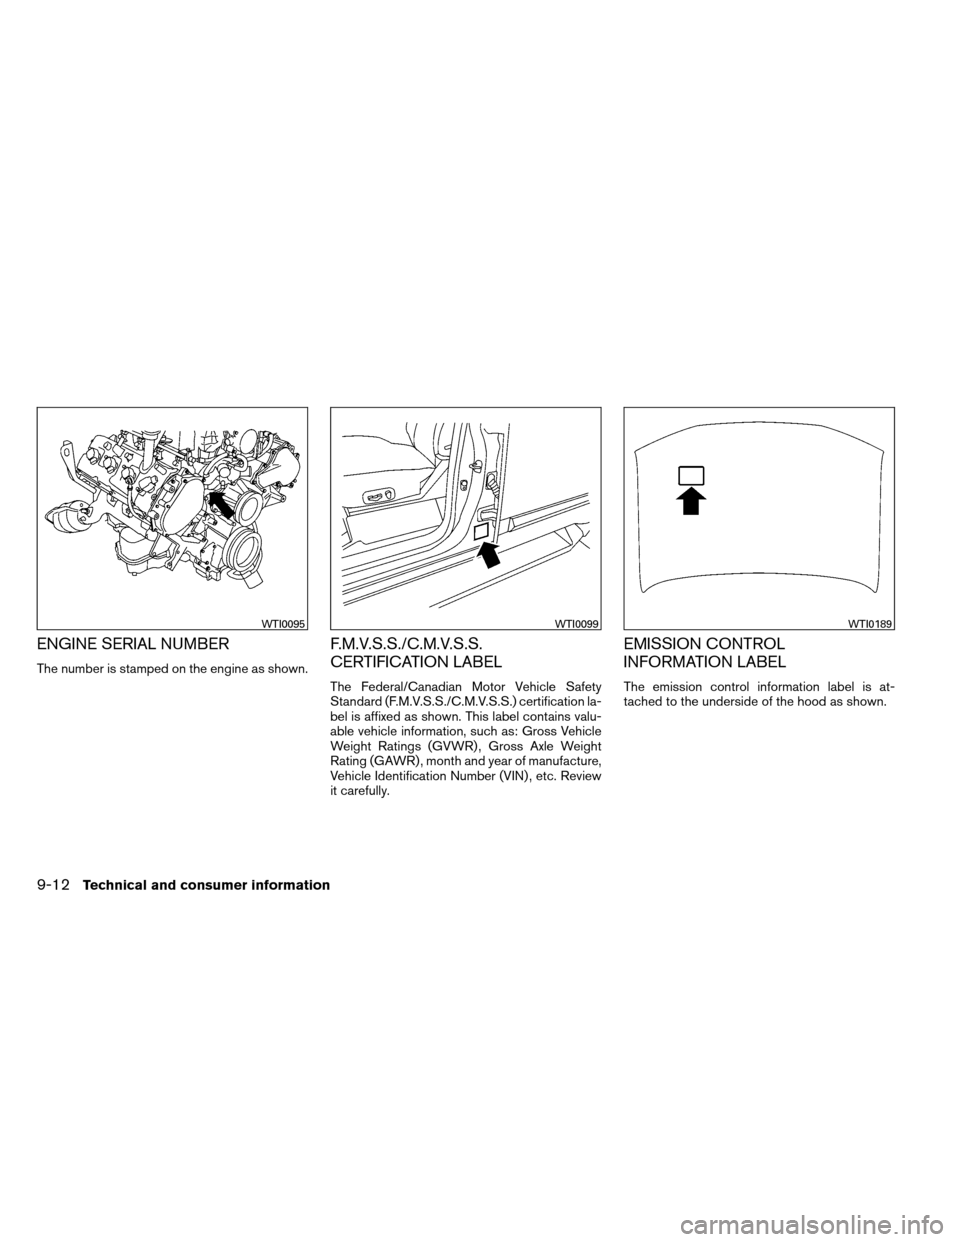 NISSAN ARMADA 2012 1.G Owners Manual ENGINE SERIAL NUMBER
The number is stamped on the engine as shown.
F.M.V.S.S./C.M.V.S.S.
CERTIFICATION LABEL
The Federal/Canadian Motor Vehicle Safety
Standard (F.M.V.S.S./C.M.V.S.S.) certification la